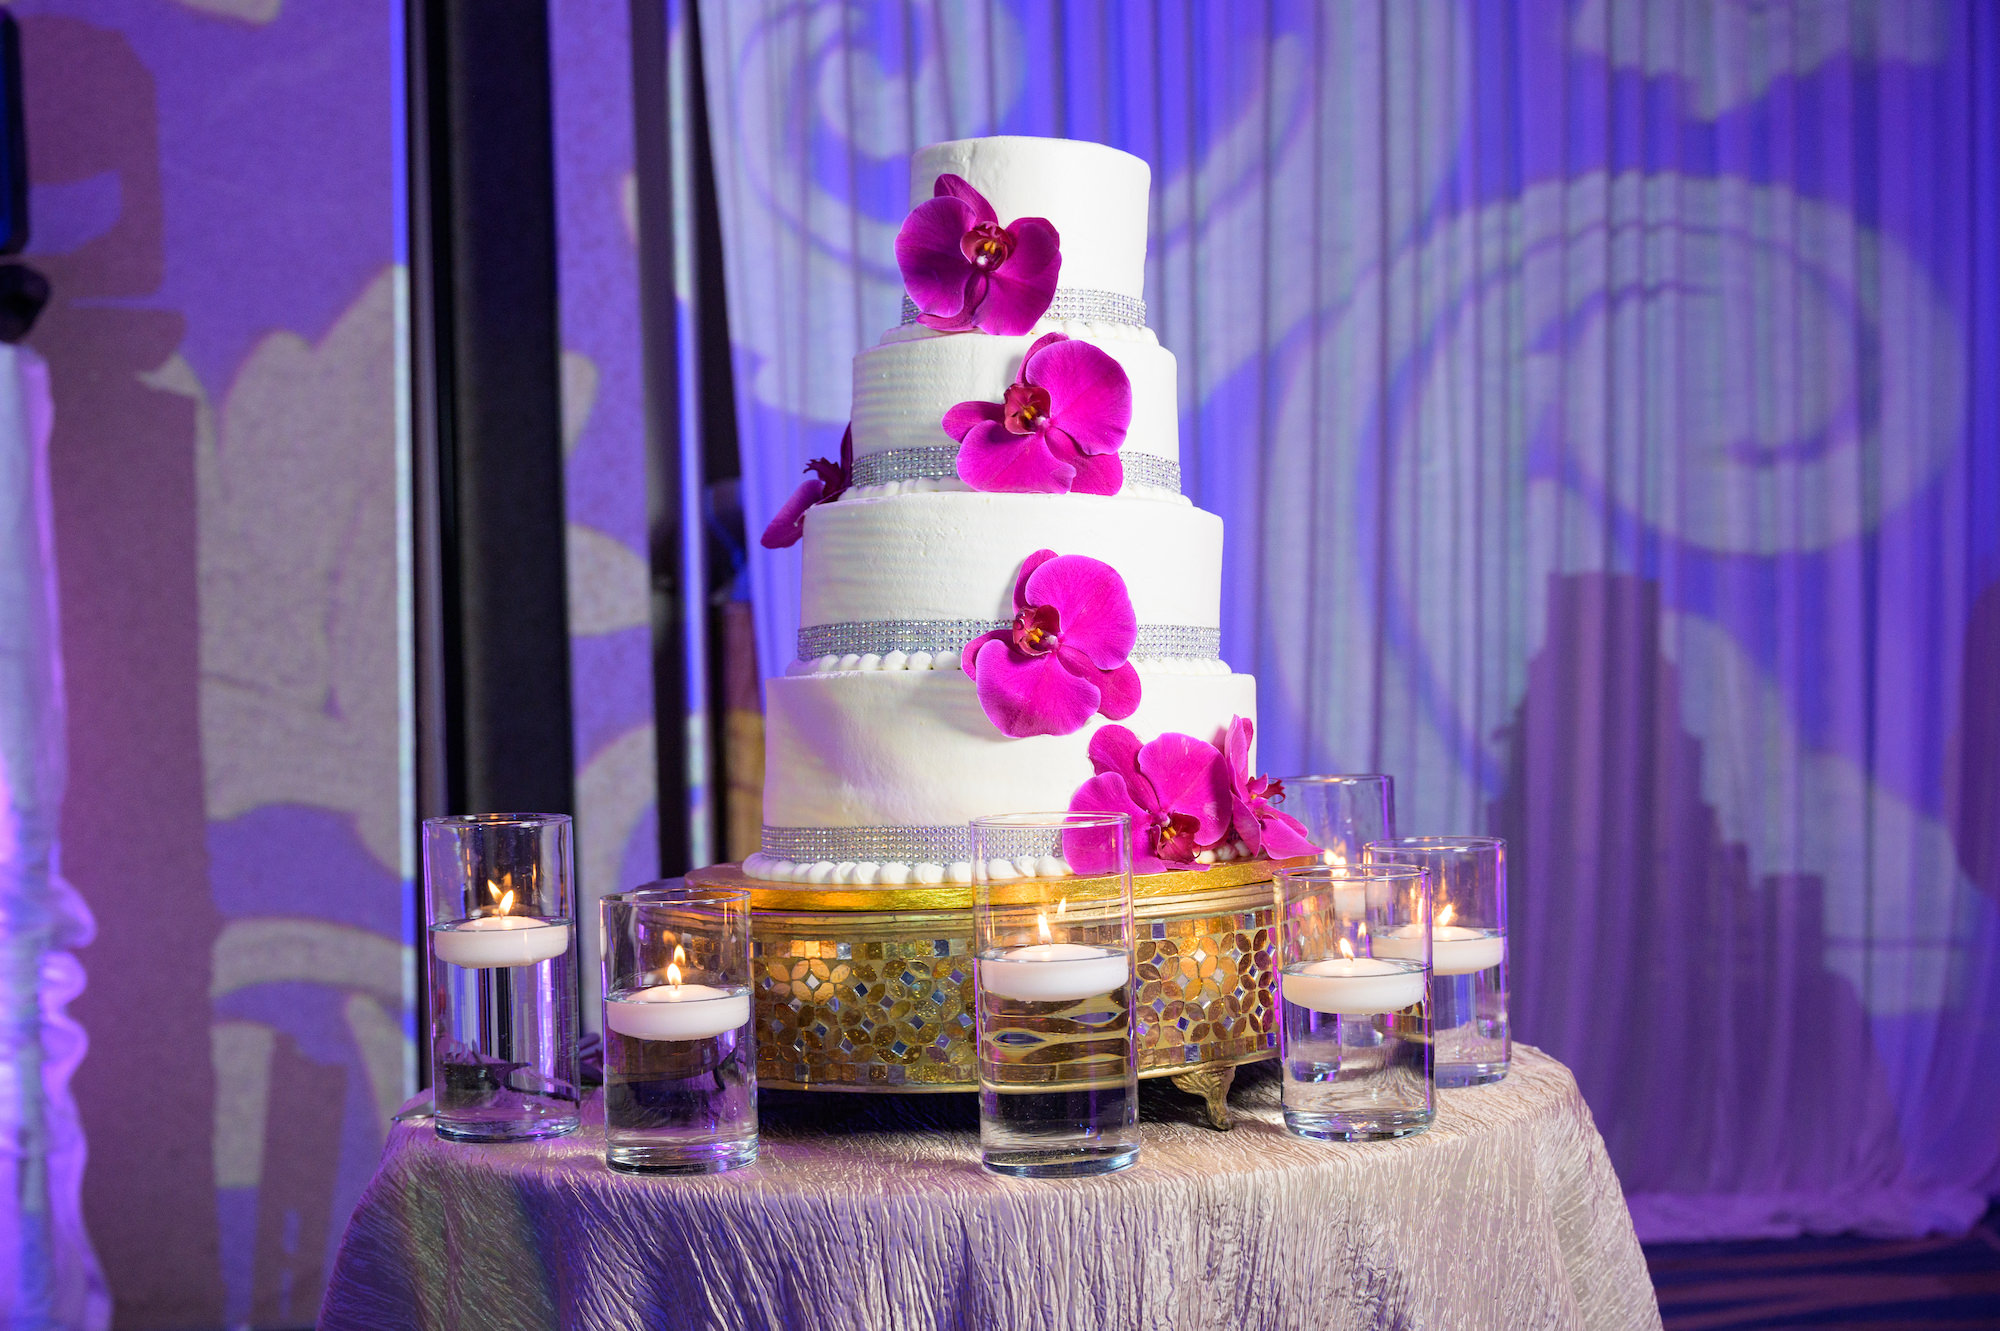 Tropical Round Four Tier Wedding Cake, White Buttercream Icing with Fuchsia Orchids Crystal Embellishments, Gold Decorative Cake Stand